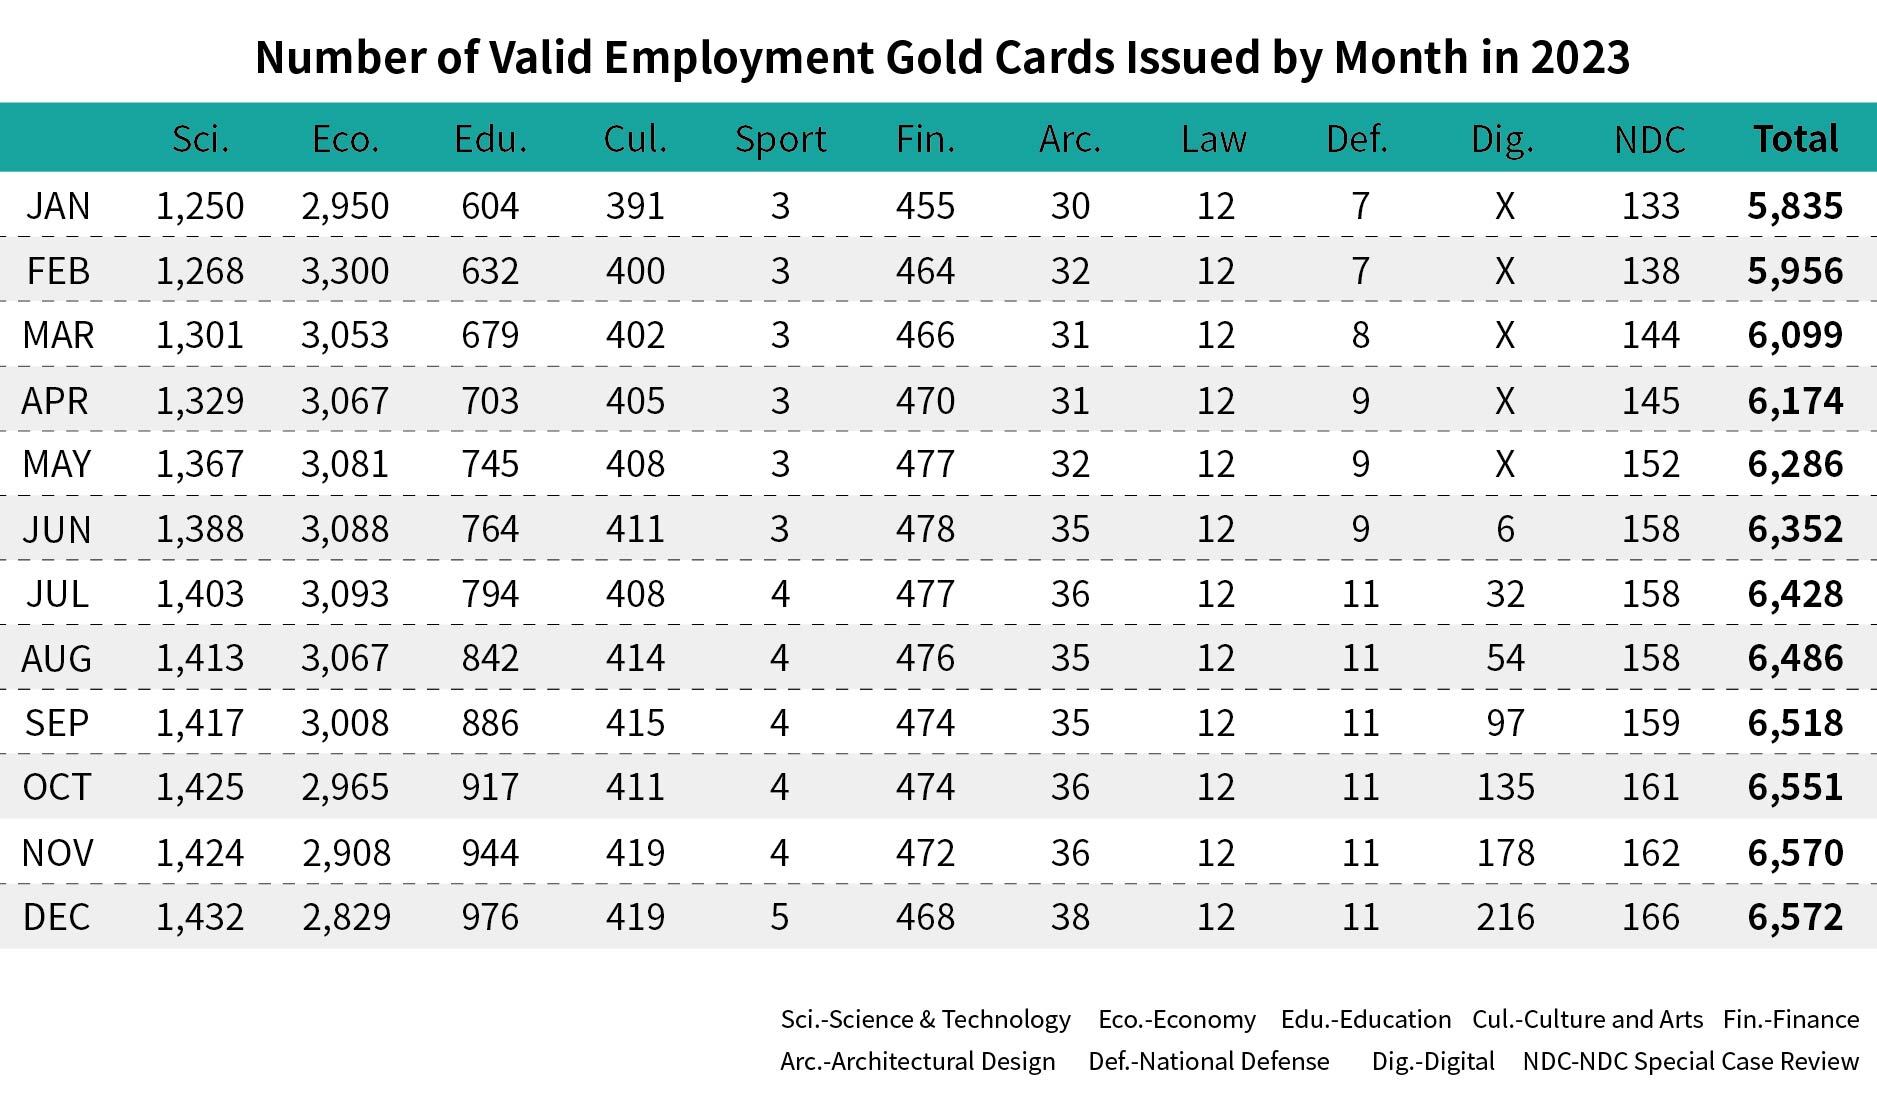 Number of Valid Employment Gold Cards Issued by Month-December